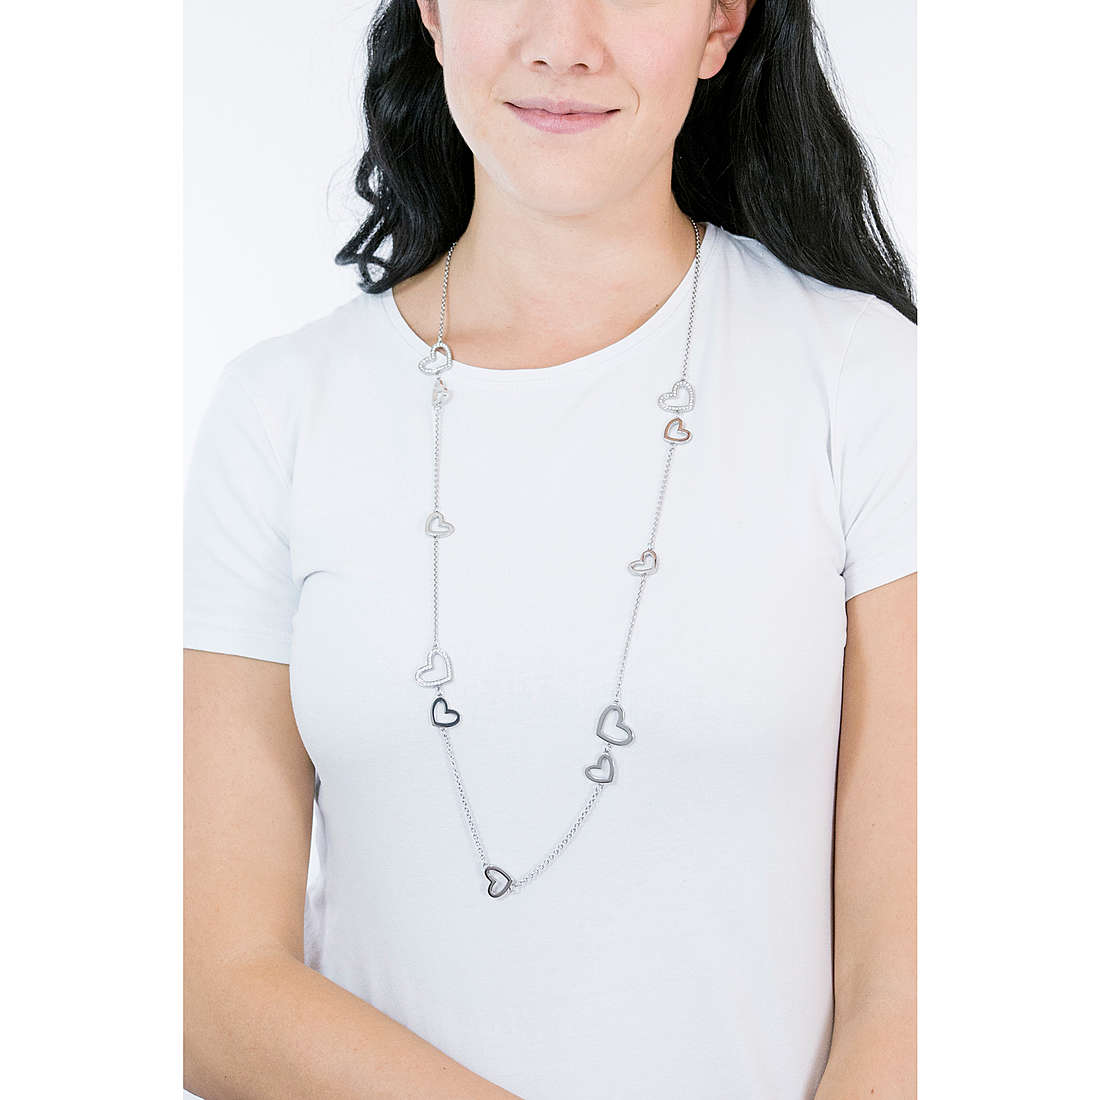 2Jewels necklaces Bright woman 251665 wearing